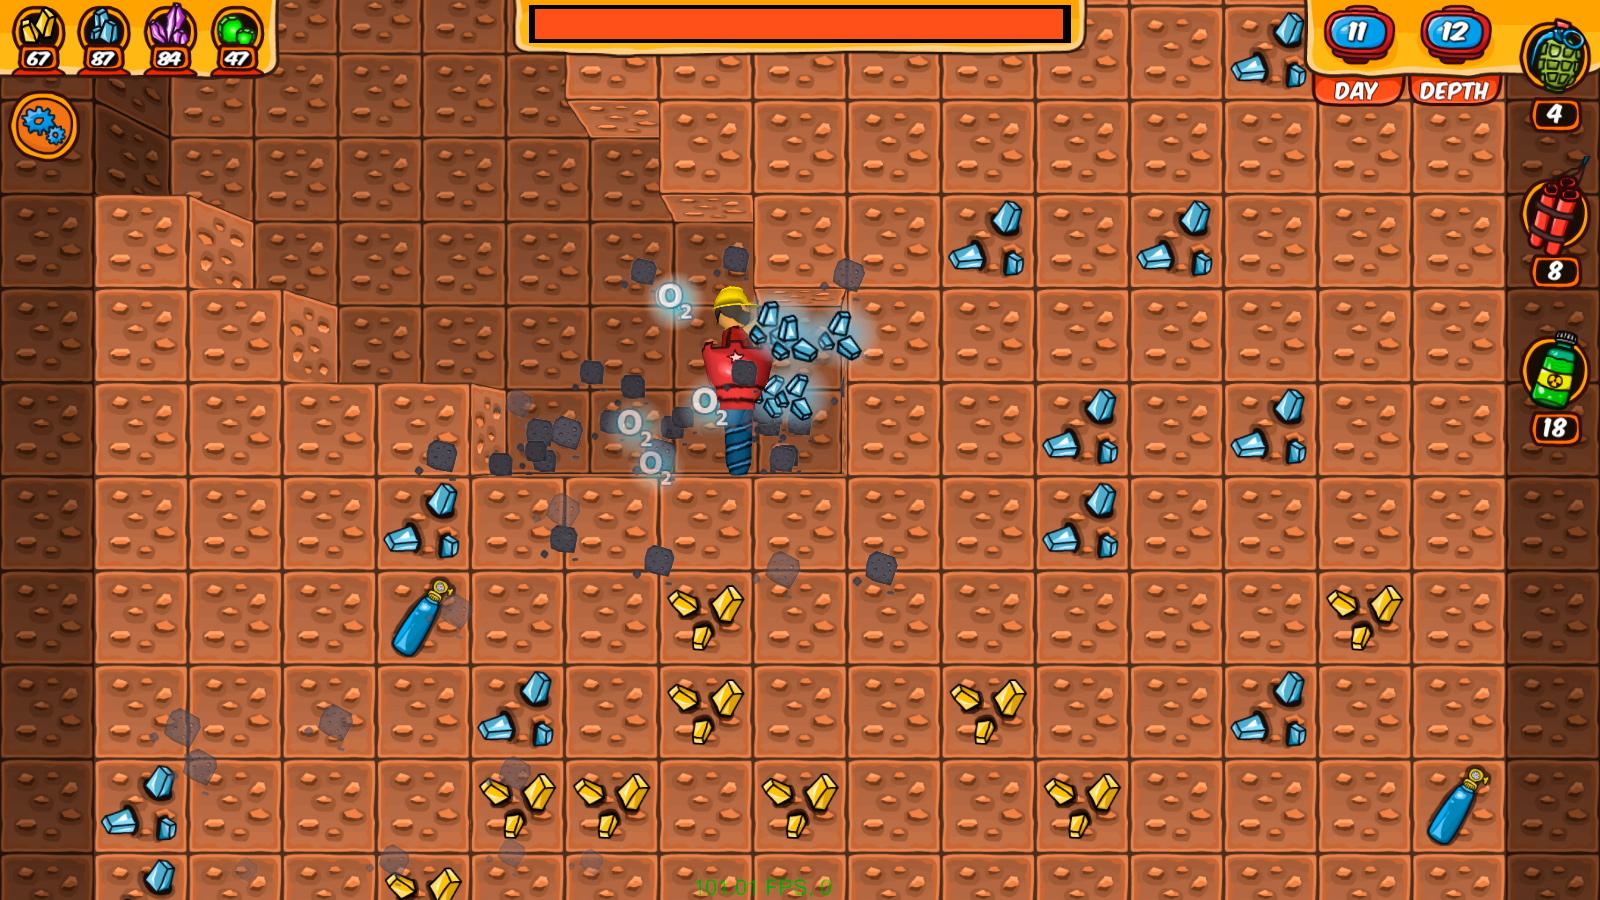 Screenshot №6 from game Mad Digger